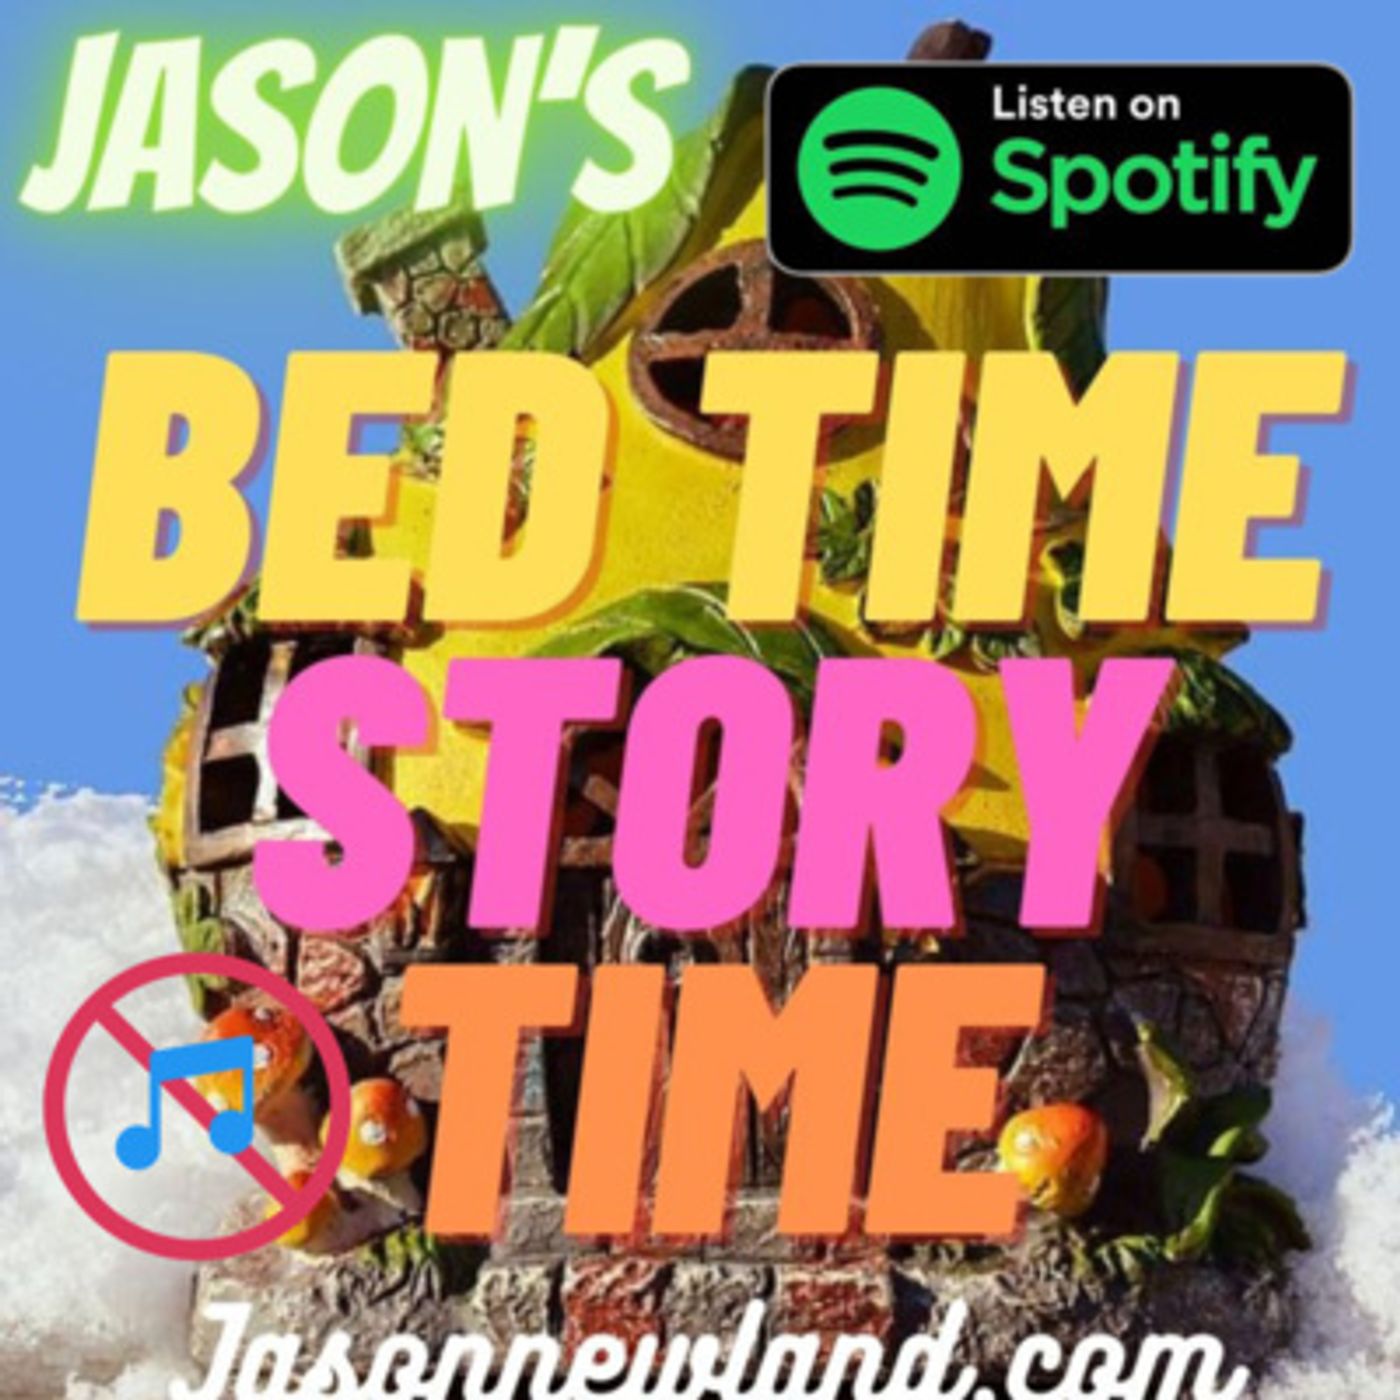 #25 THE 12 DIRTY DANCING PRINCESSES - Jasons Bed Time Story Time